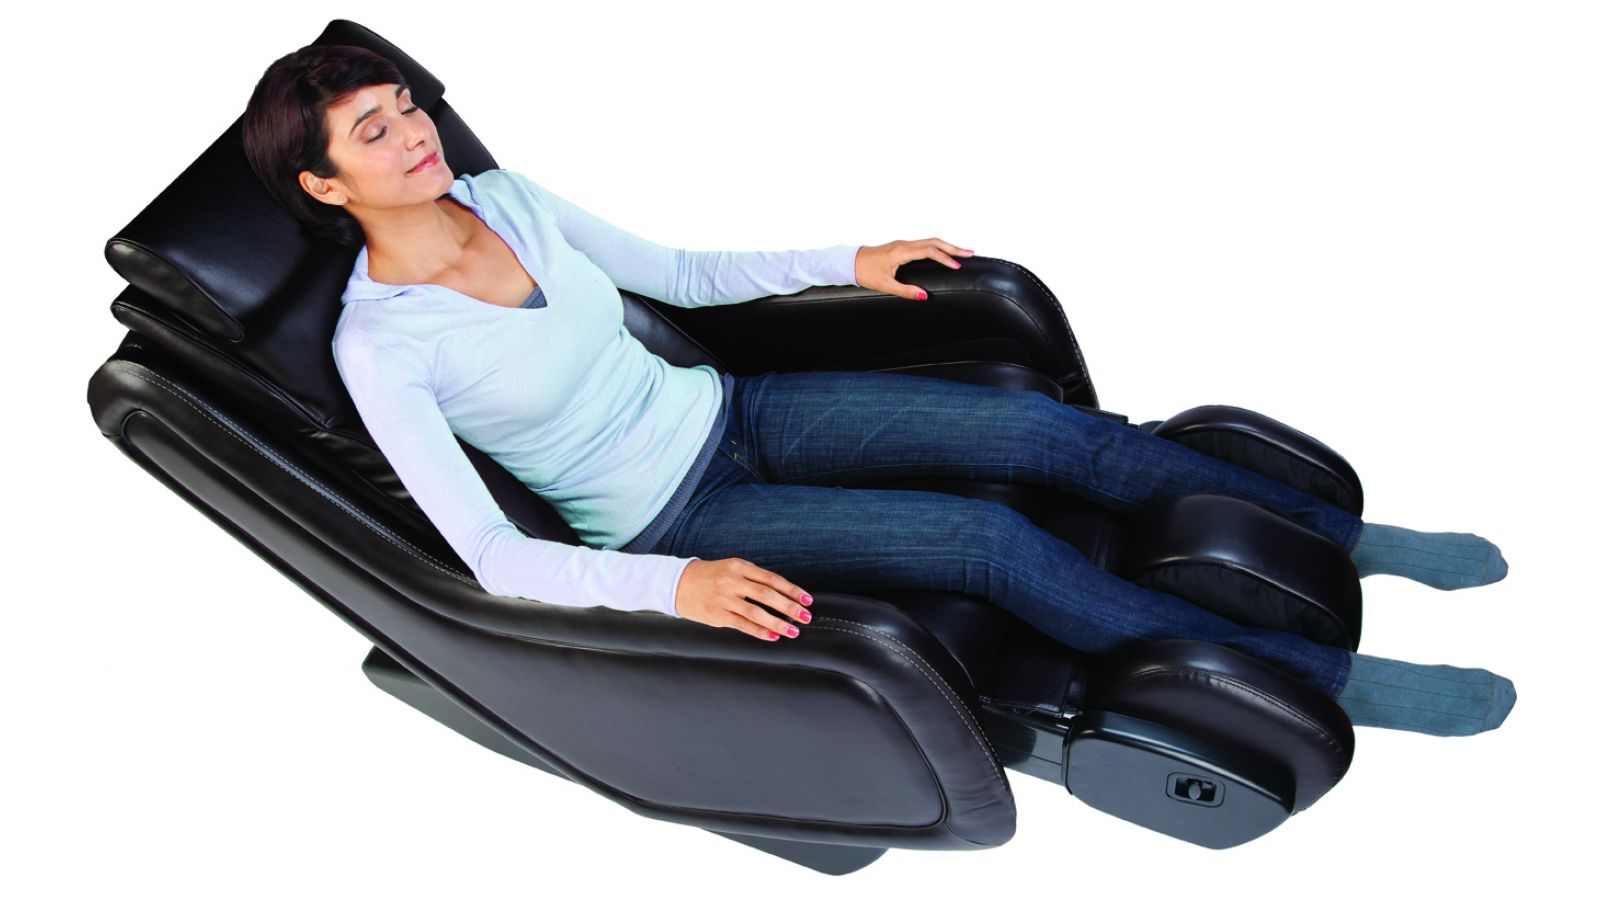 Human Touch ZeroG 2.0 Immersion Seating Massage Chair